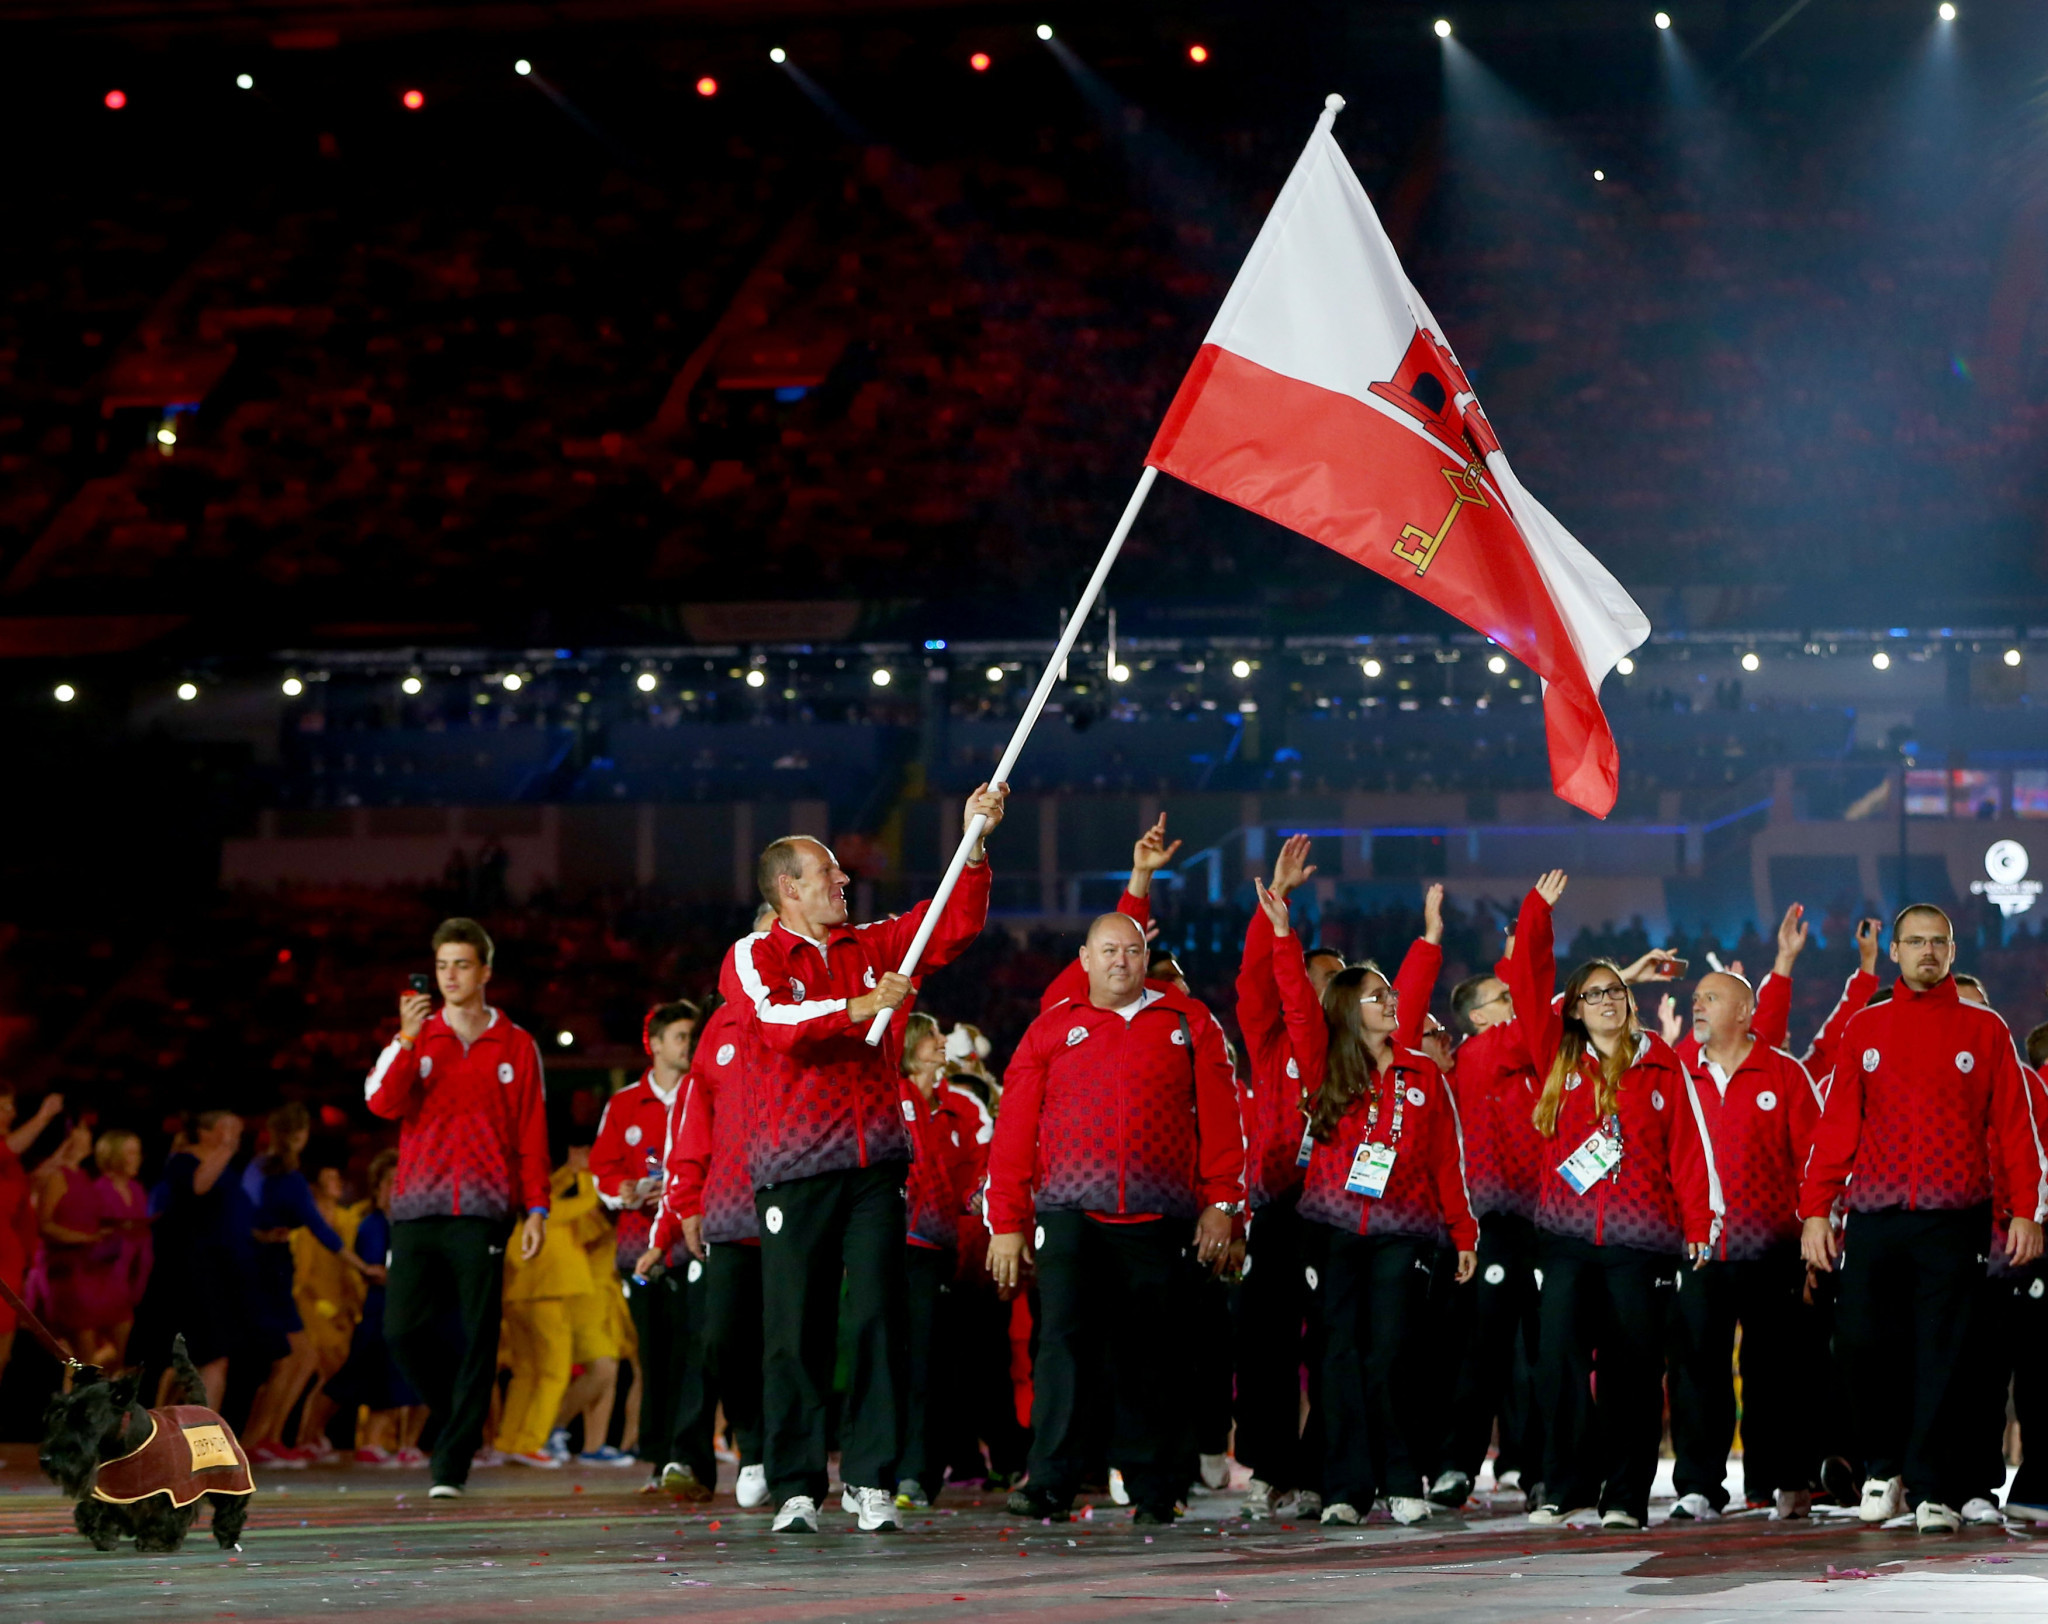 Chris Walker carrying the Gibraltar flag at the Glasgow 2014 Commonwealth Games ©Getty Images